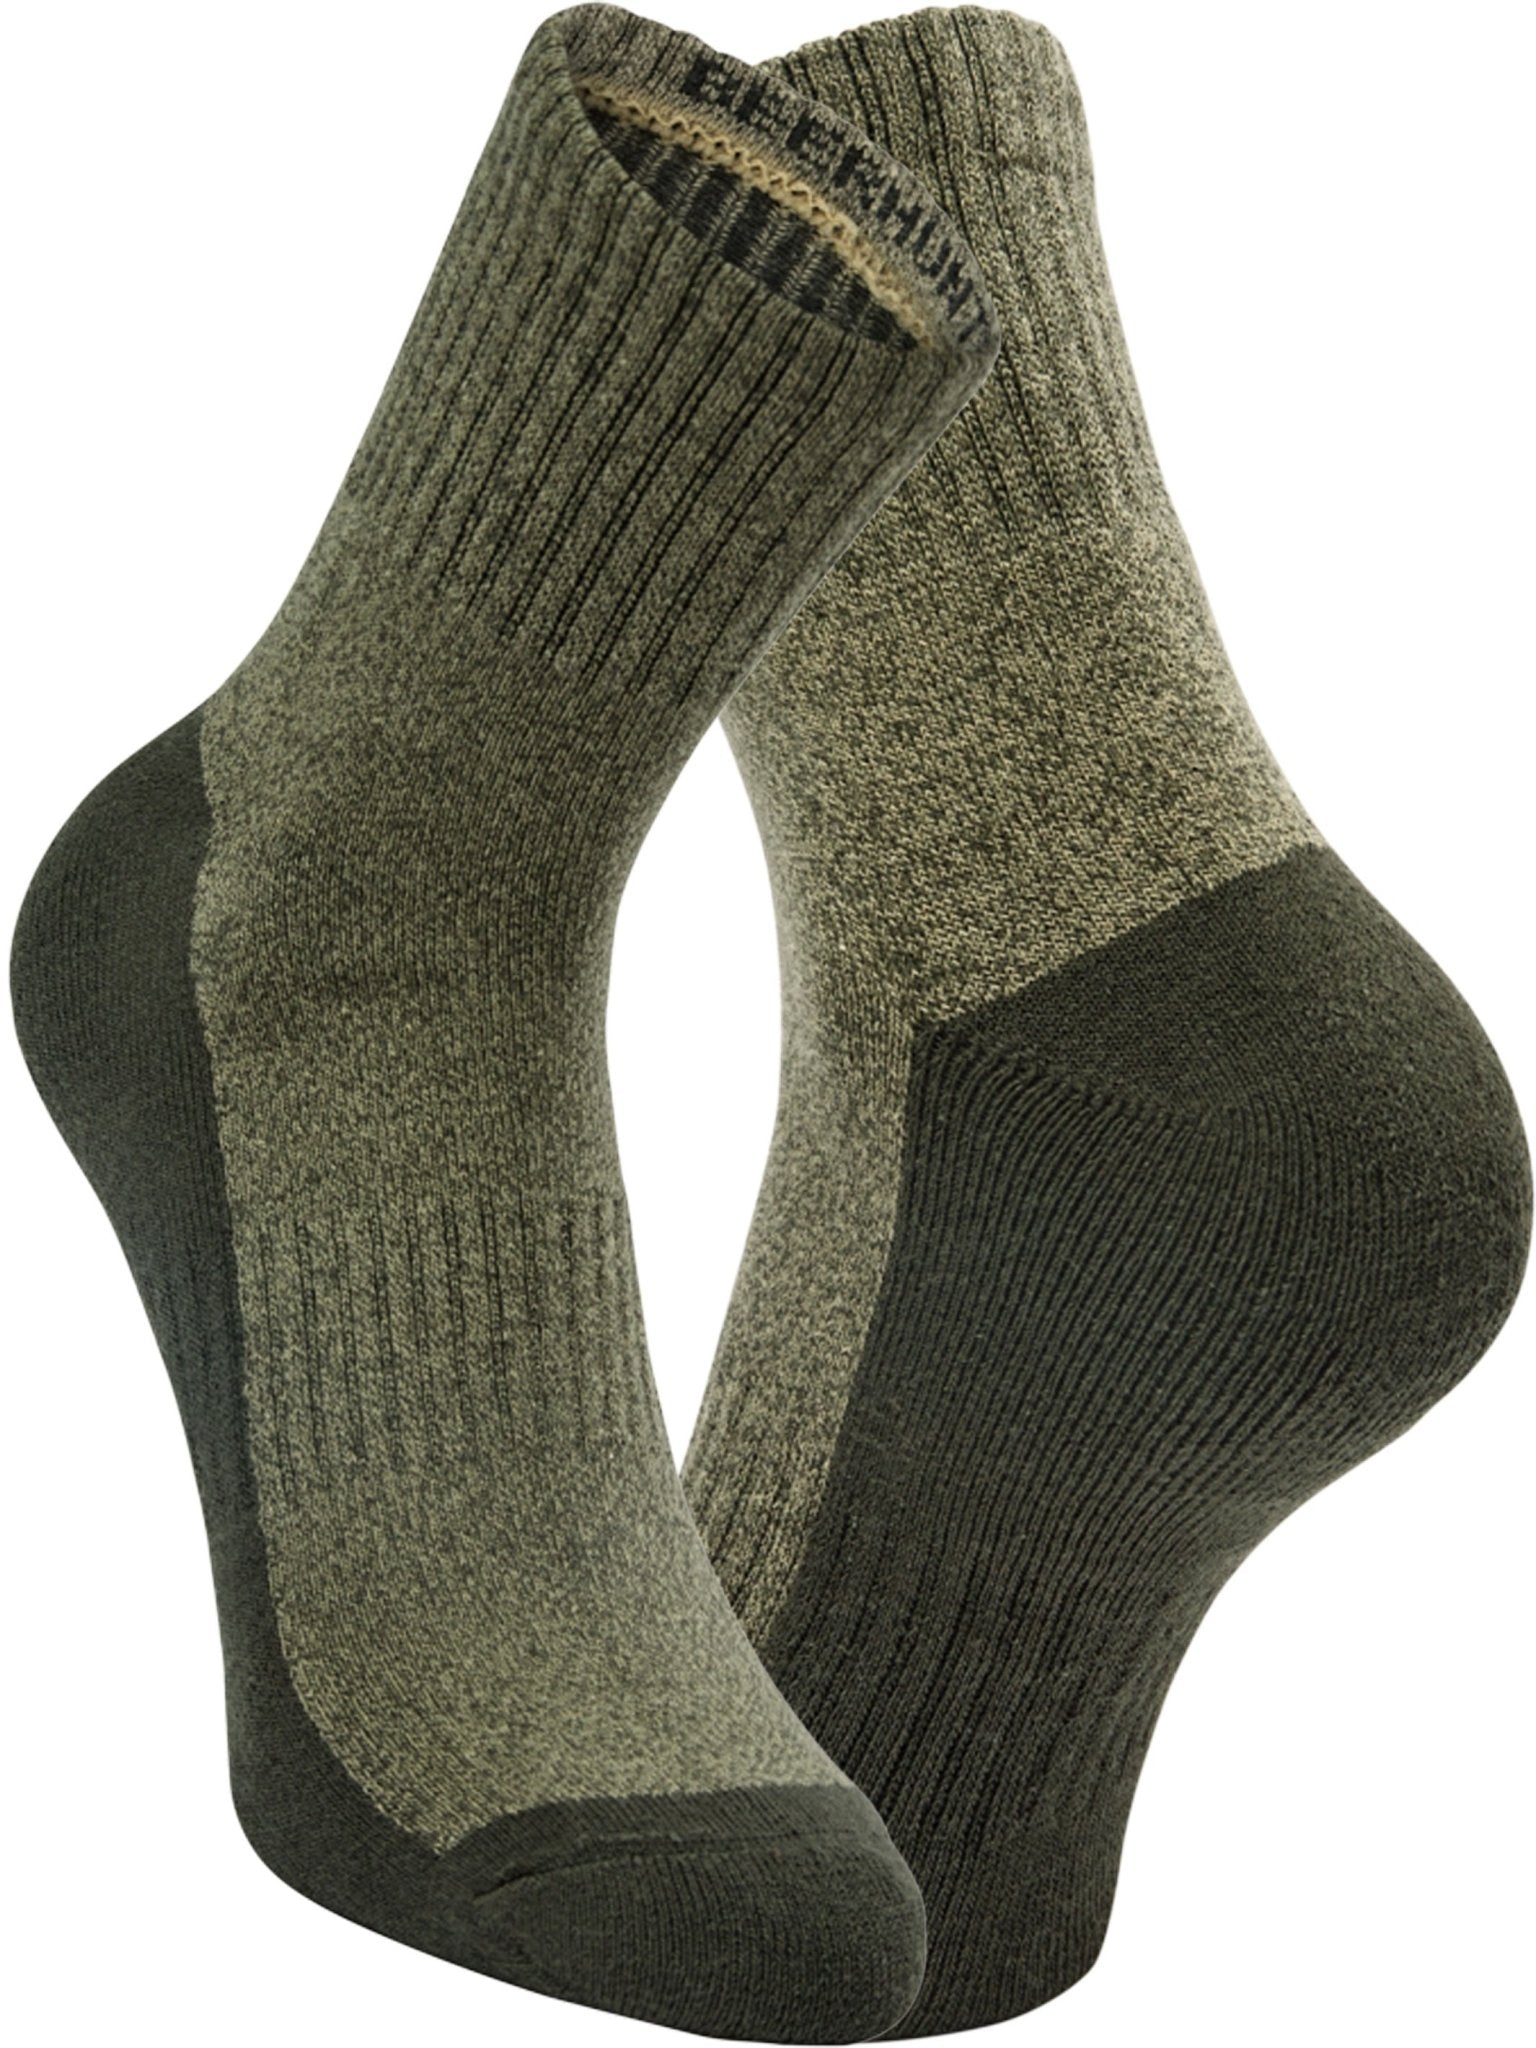 4elementsclothingDeerhunterDeerhunter - Hemp Mix Ankle Socks - Terry sole for comfort and shock absorption Ribbed arch supportSocks8304-331-3639